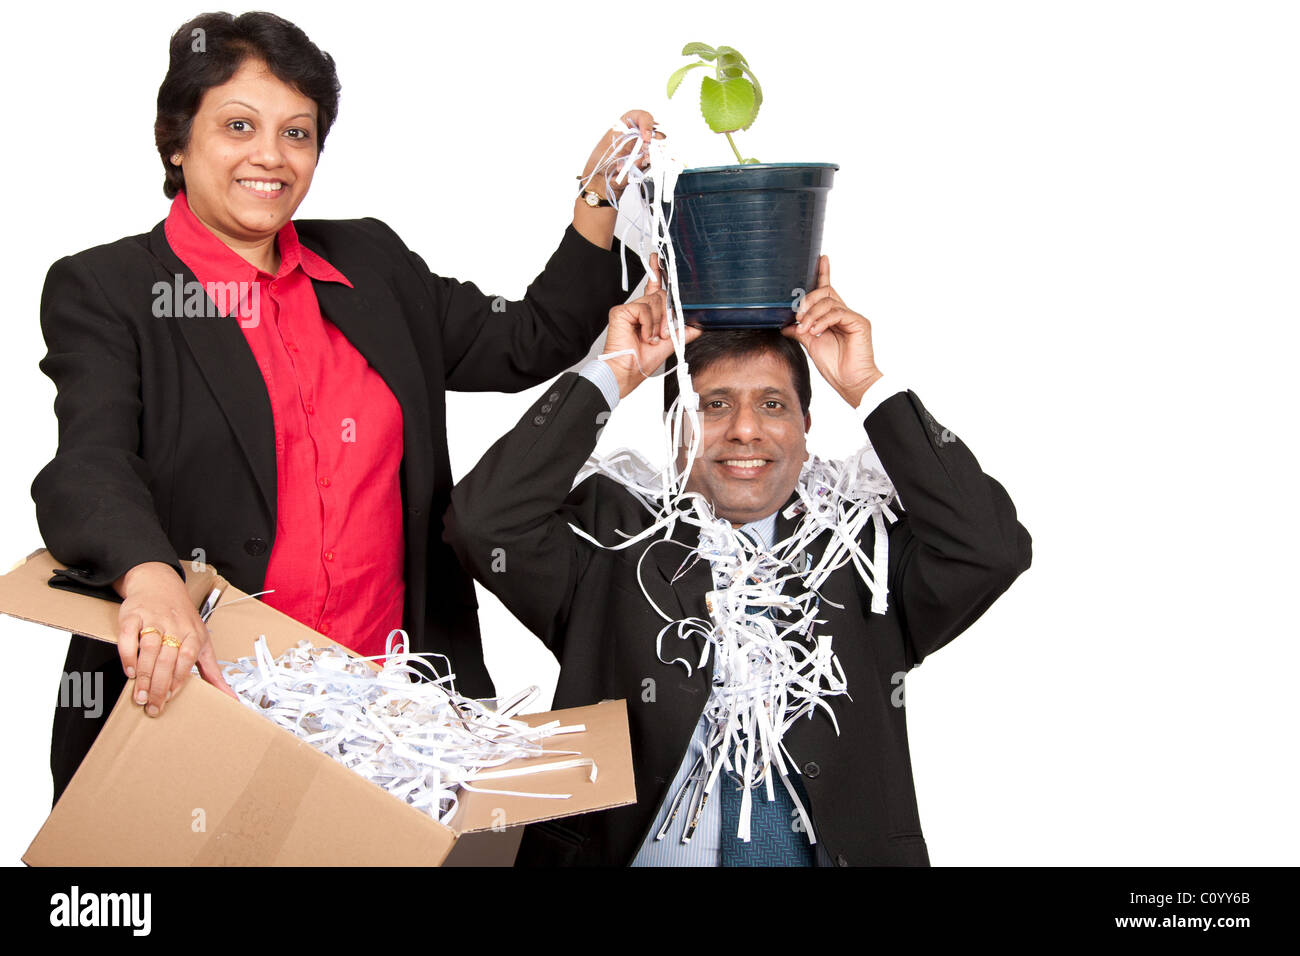 A couple engaged in a process of shredding paper to save the environment. Stock Photo